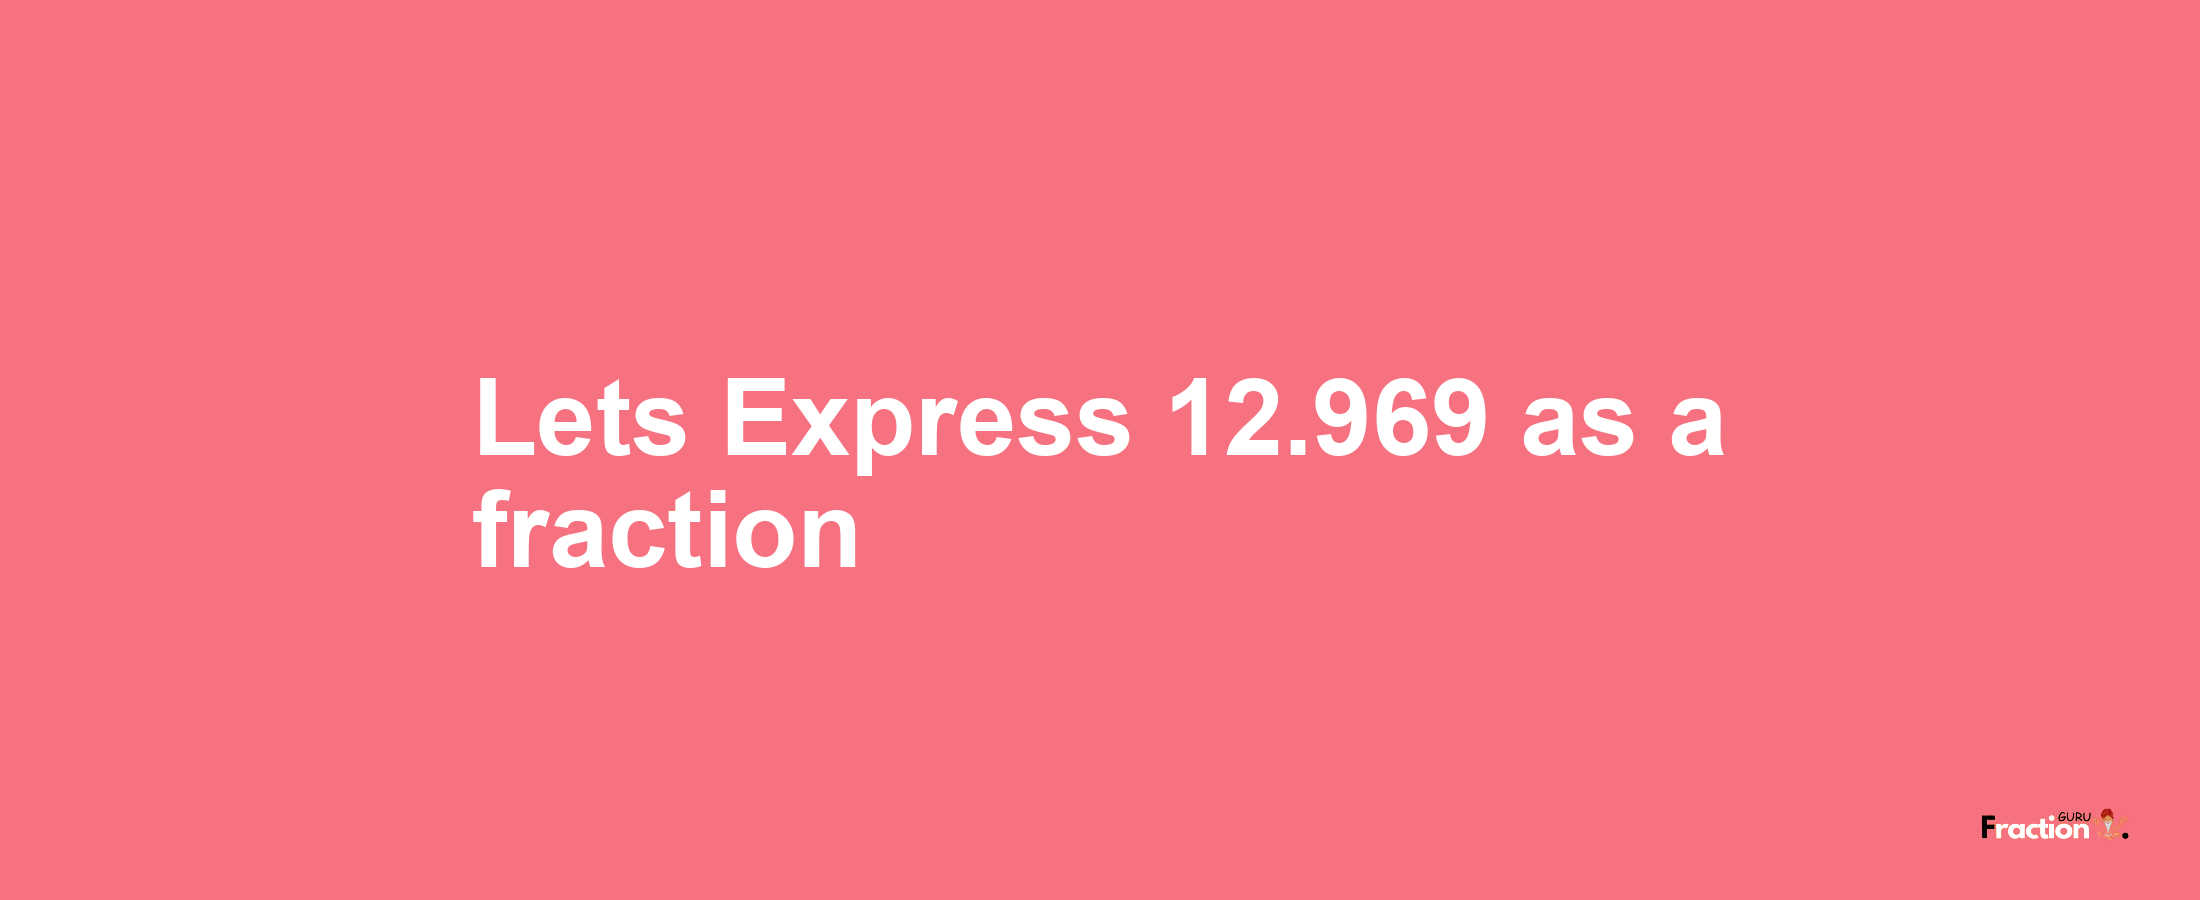 Lets Express 12.969 as afraction